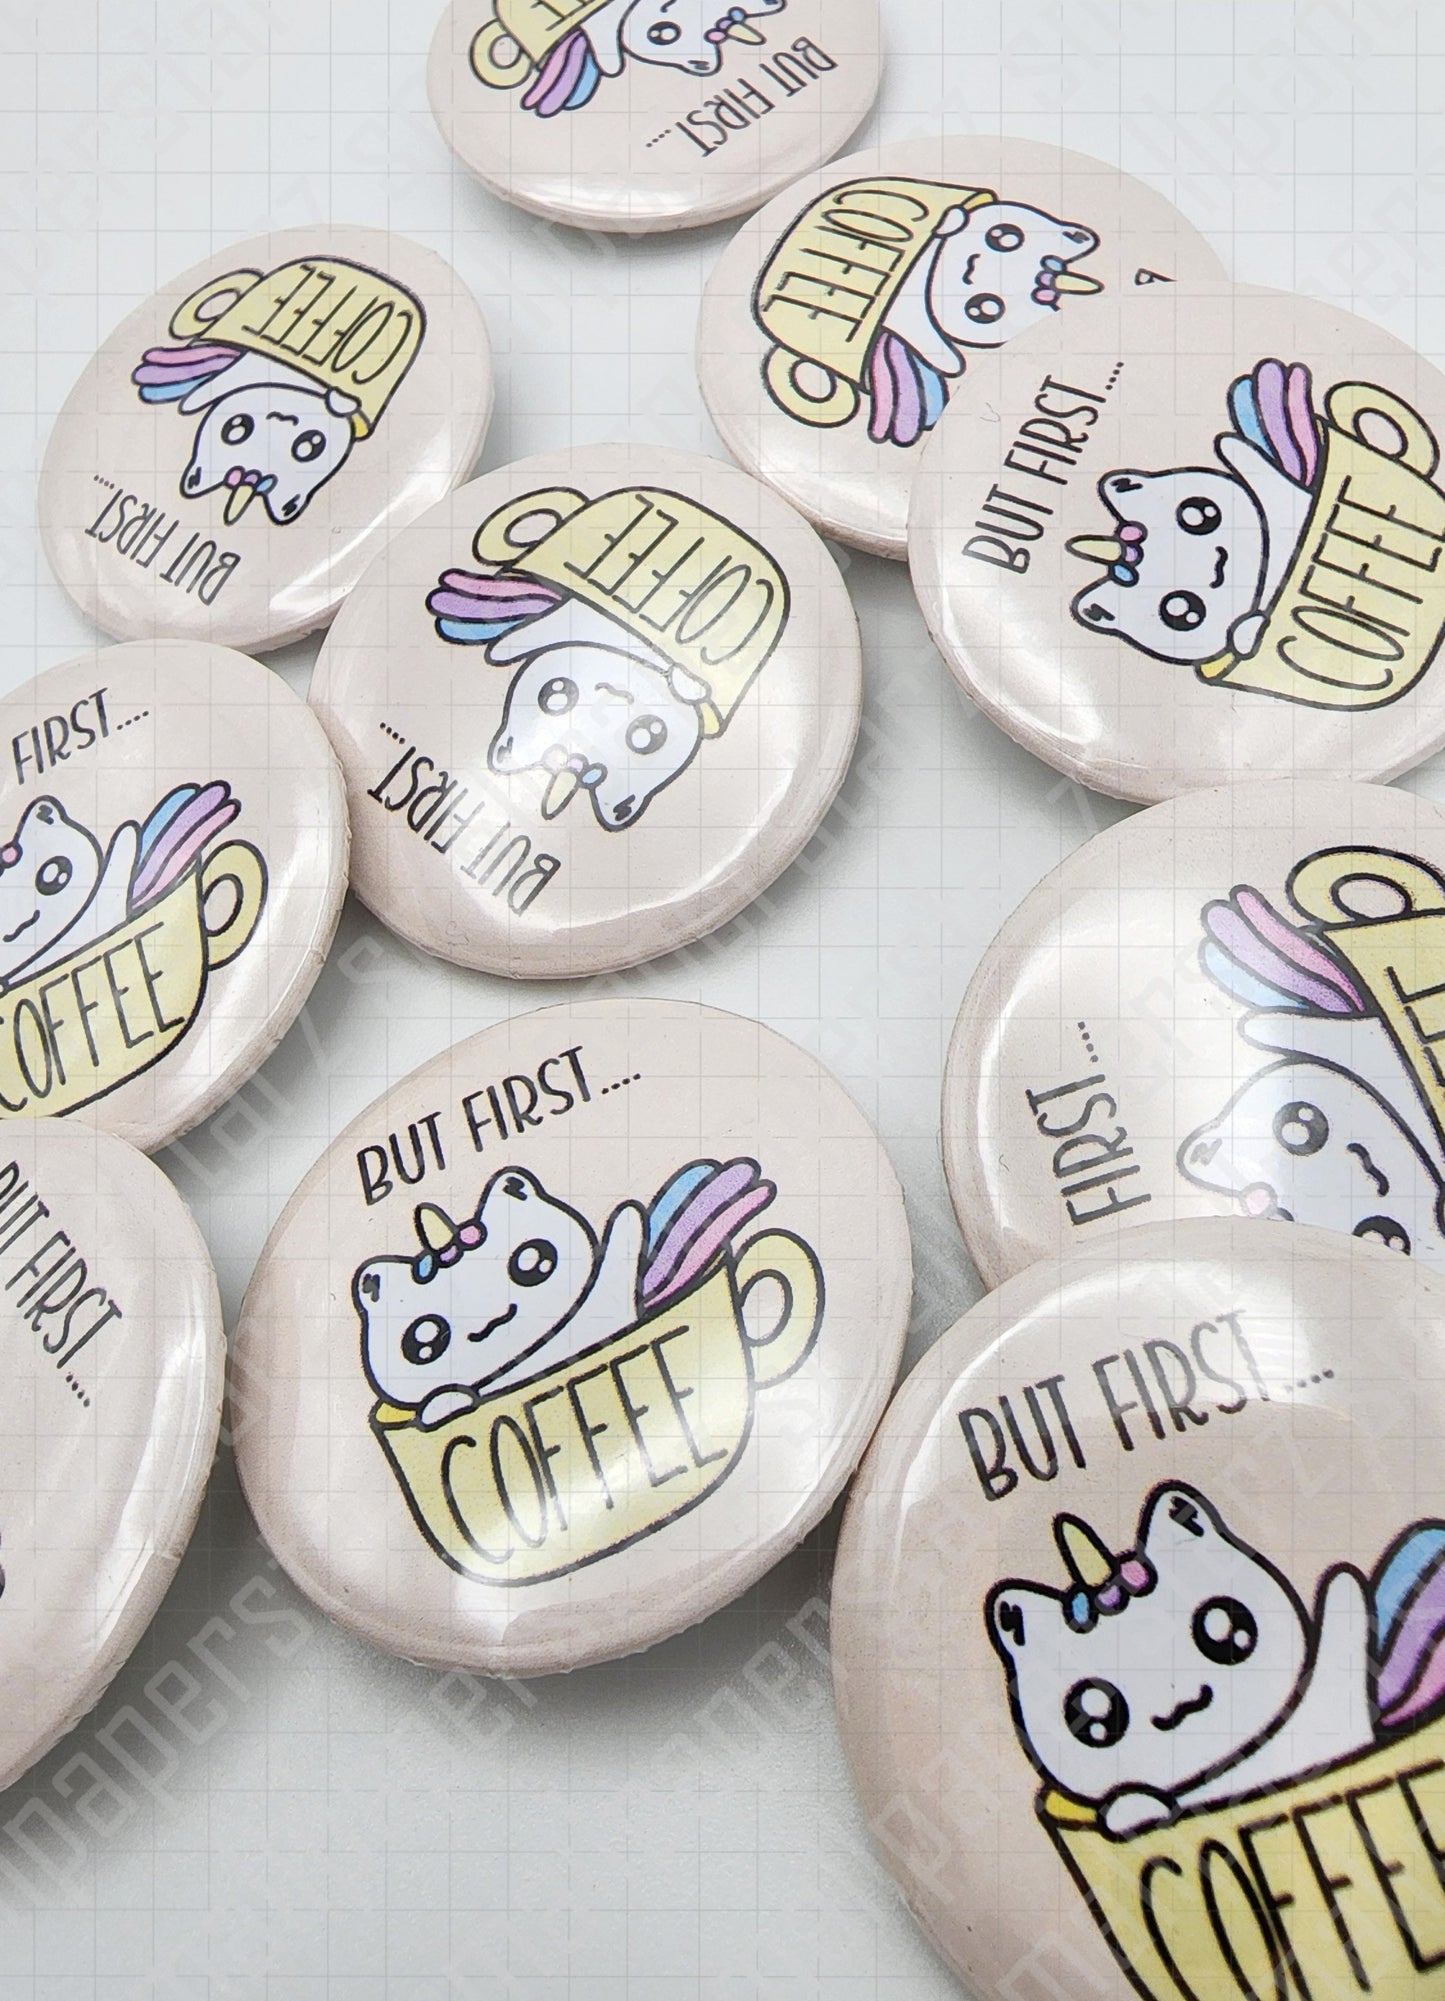 L008 - But First...Coffee Lily the Cat Pinback Button / Badge